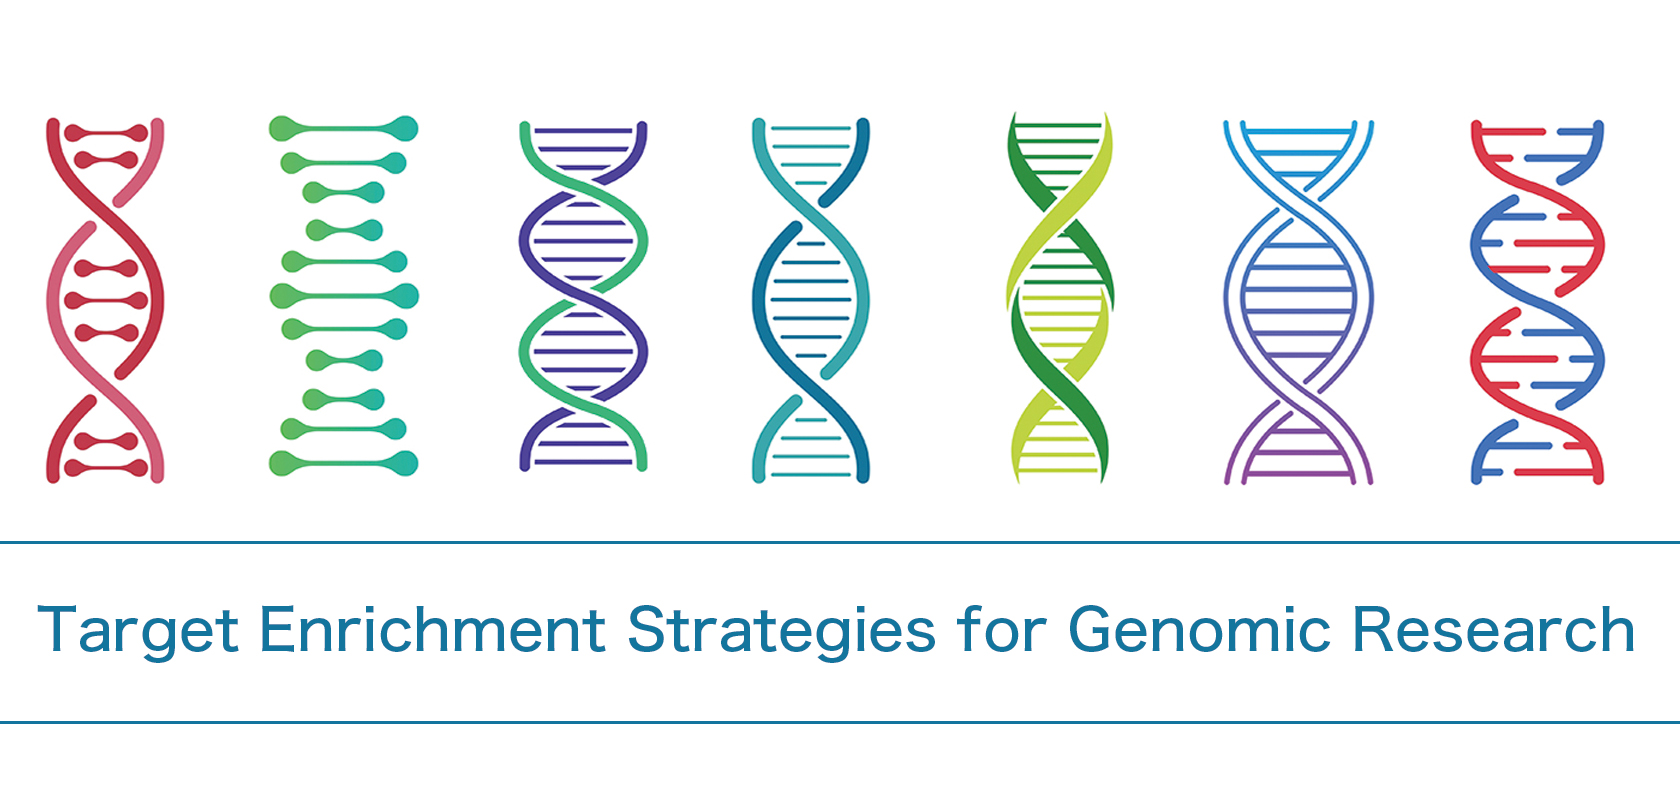 Target Enrichment Strategies for Genomic Research